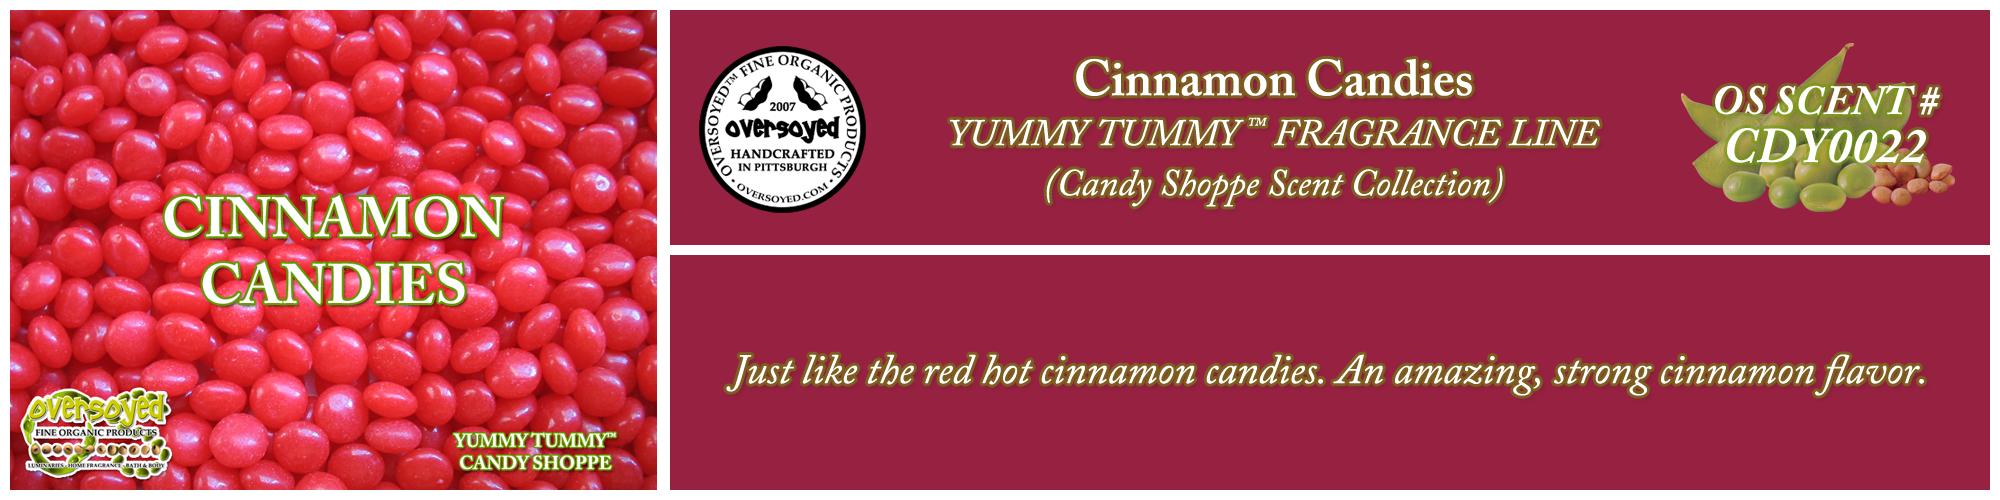 Cinnamon Candies Handcrafted Products Collection